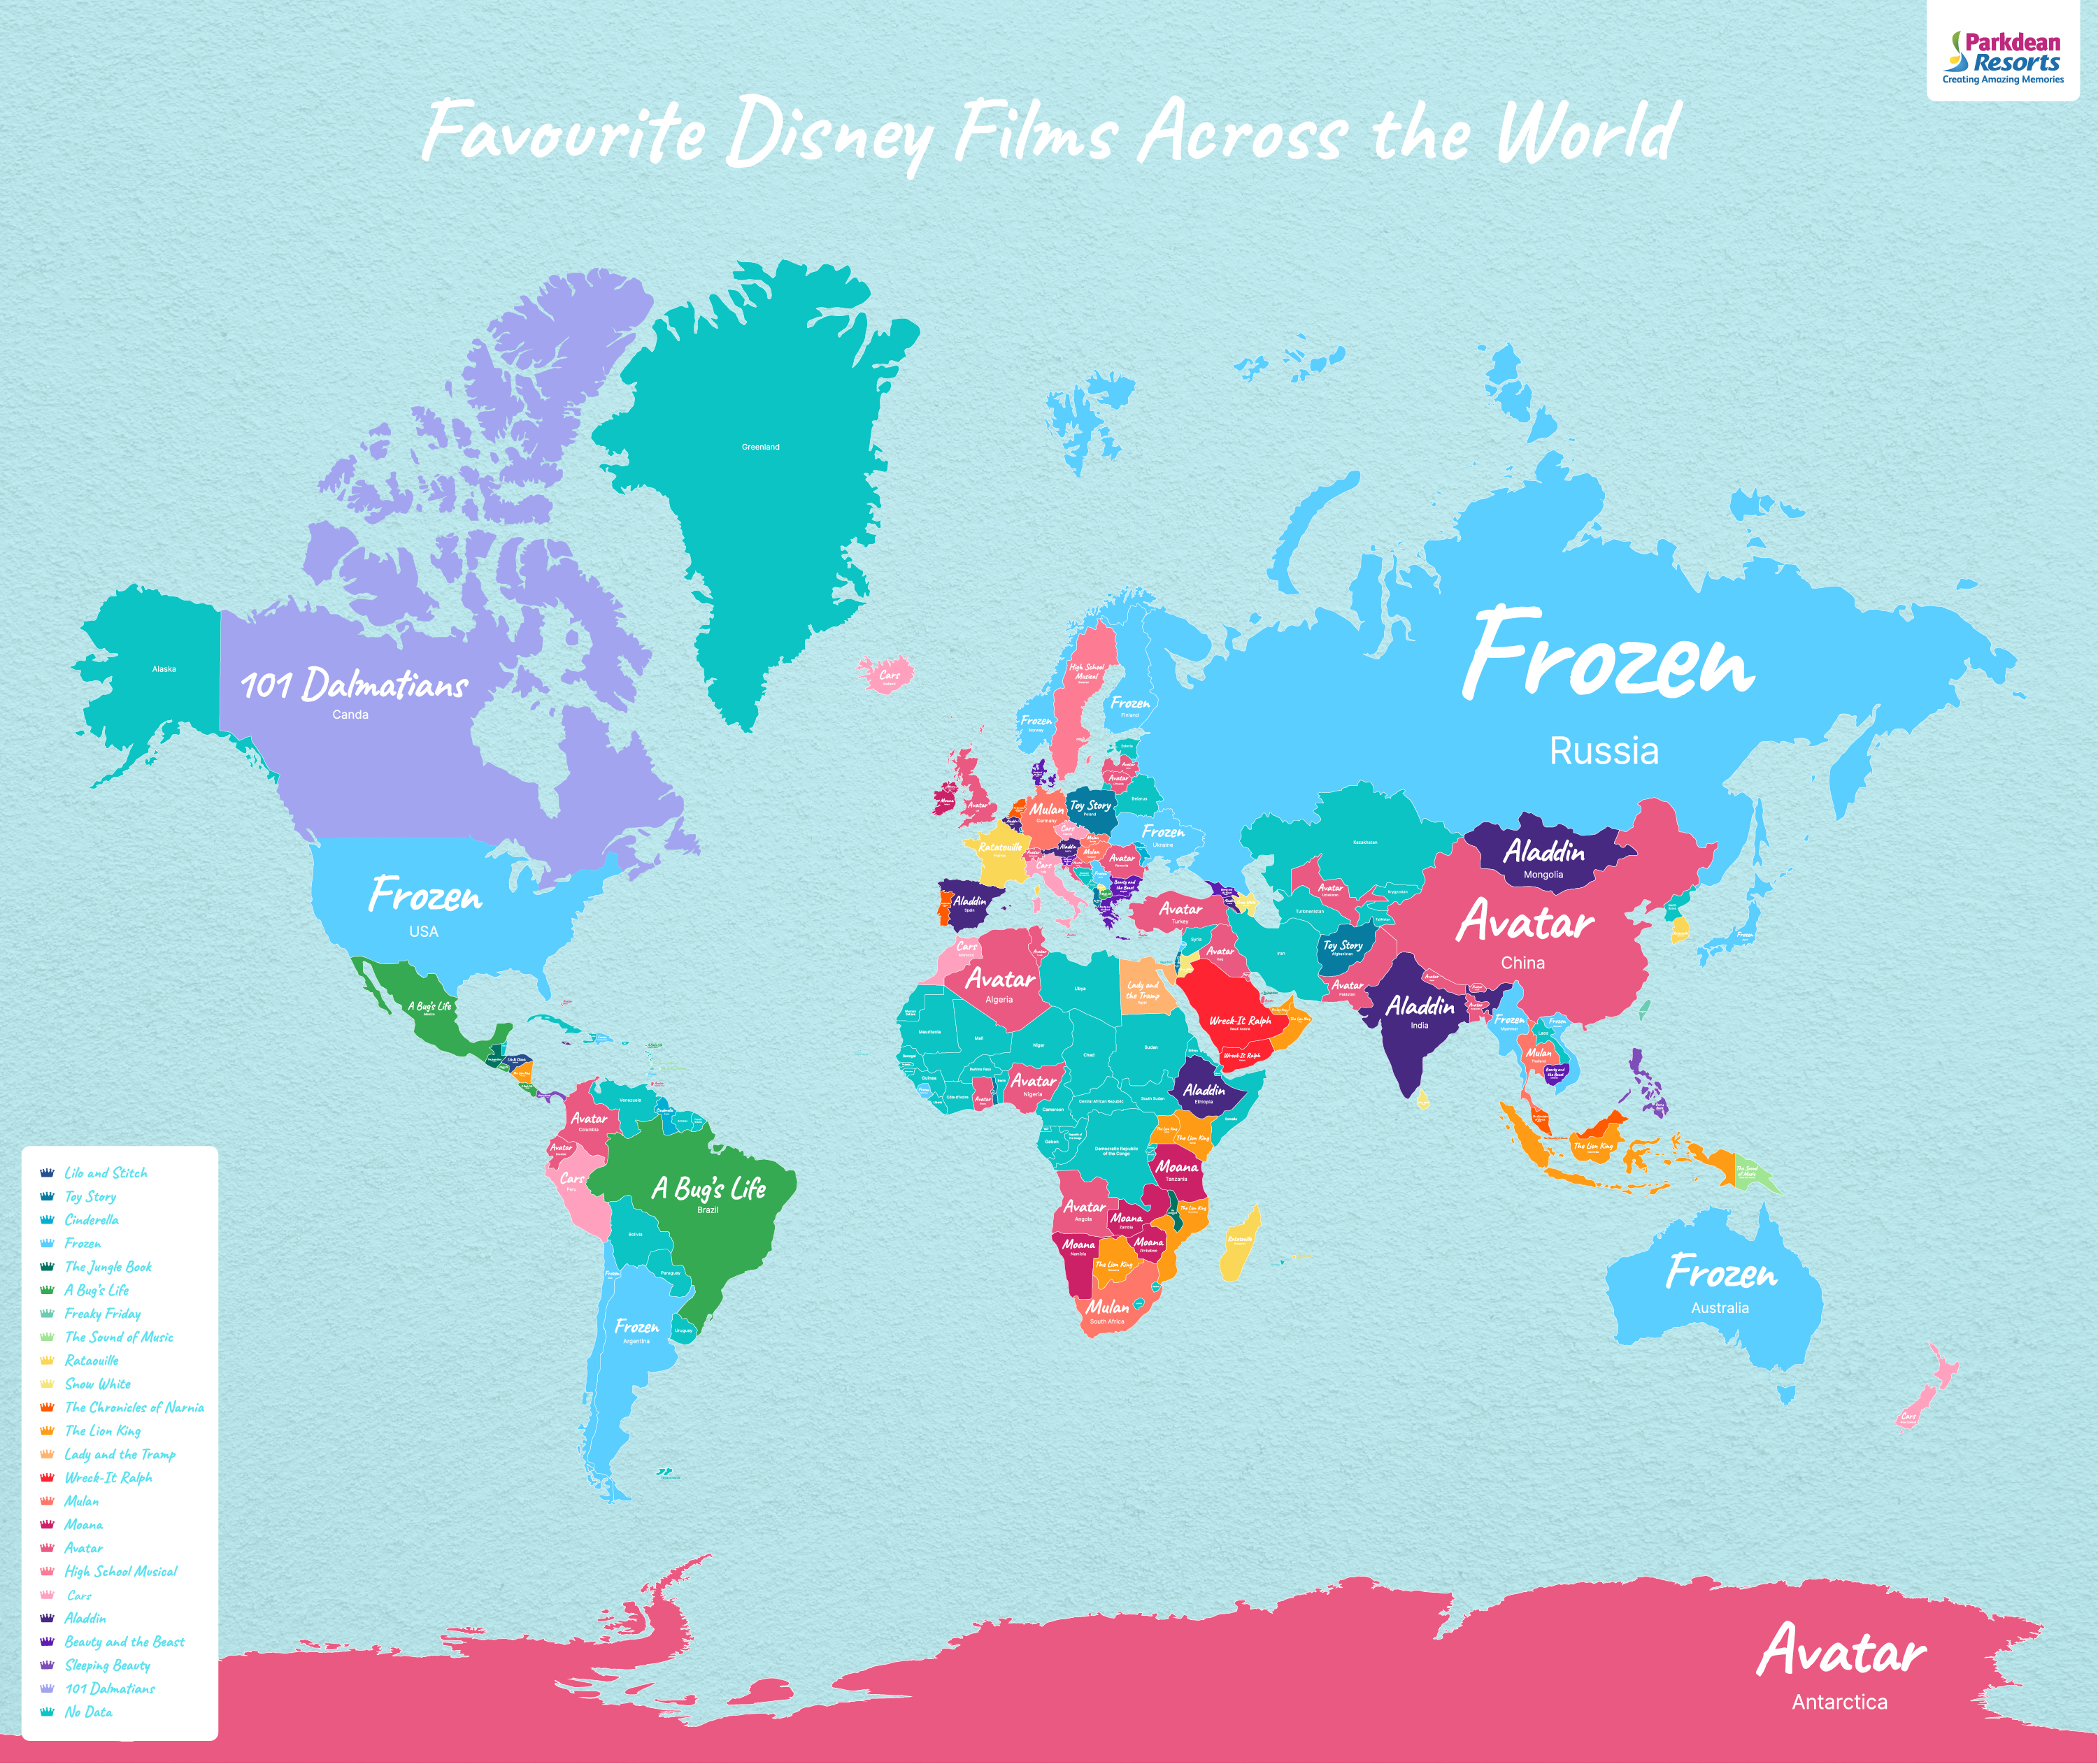 World map showing favourite Disney films by country - created by Park Dean Resorts